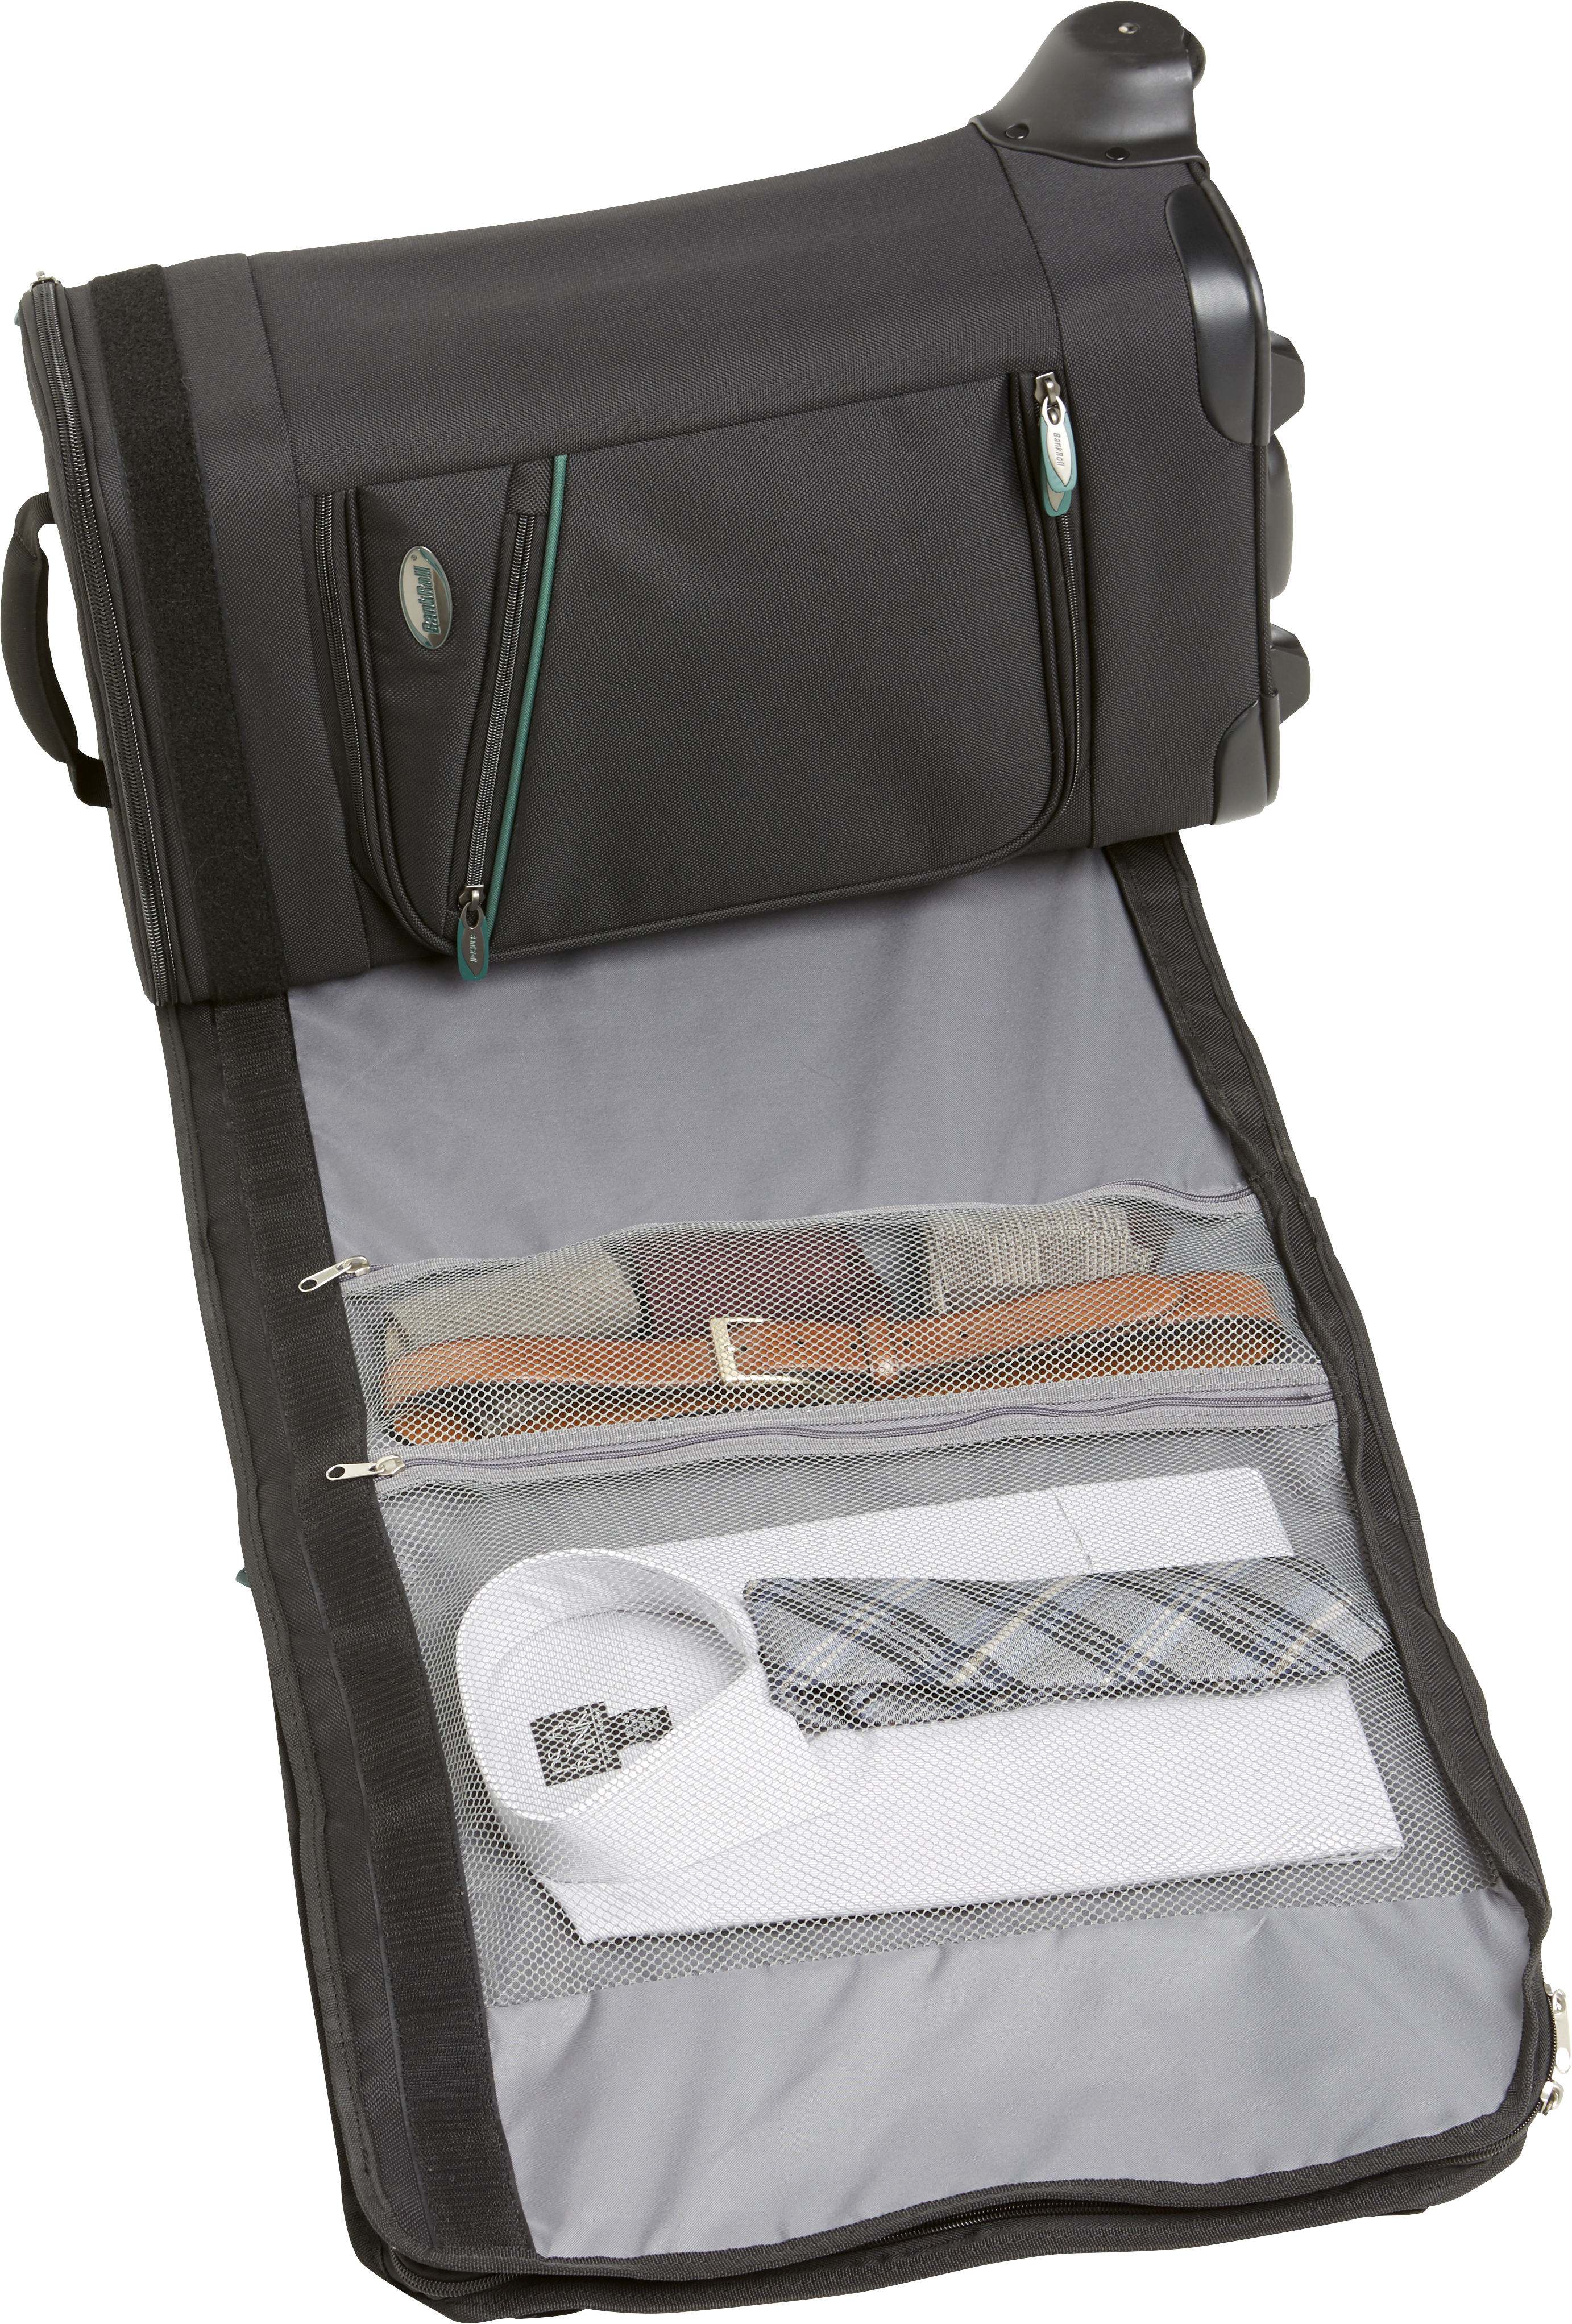 rolling garment bag with spinner wheels